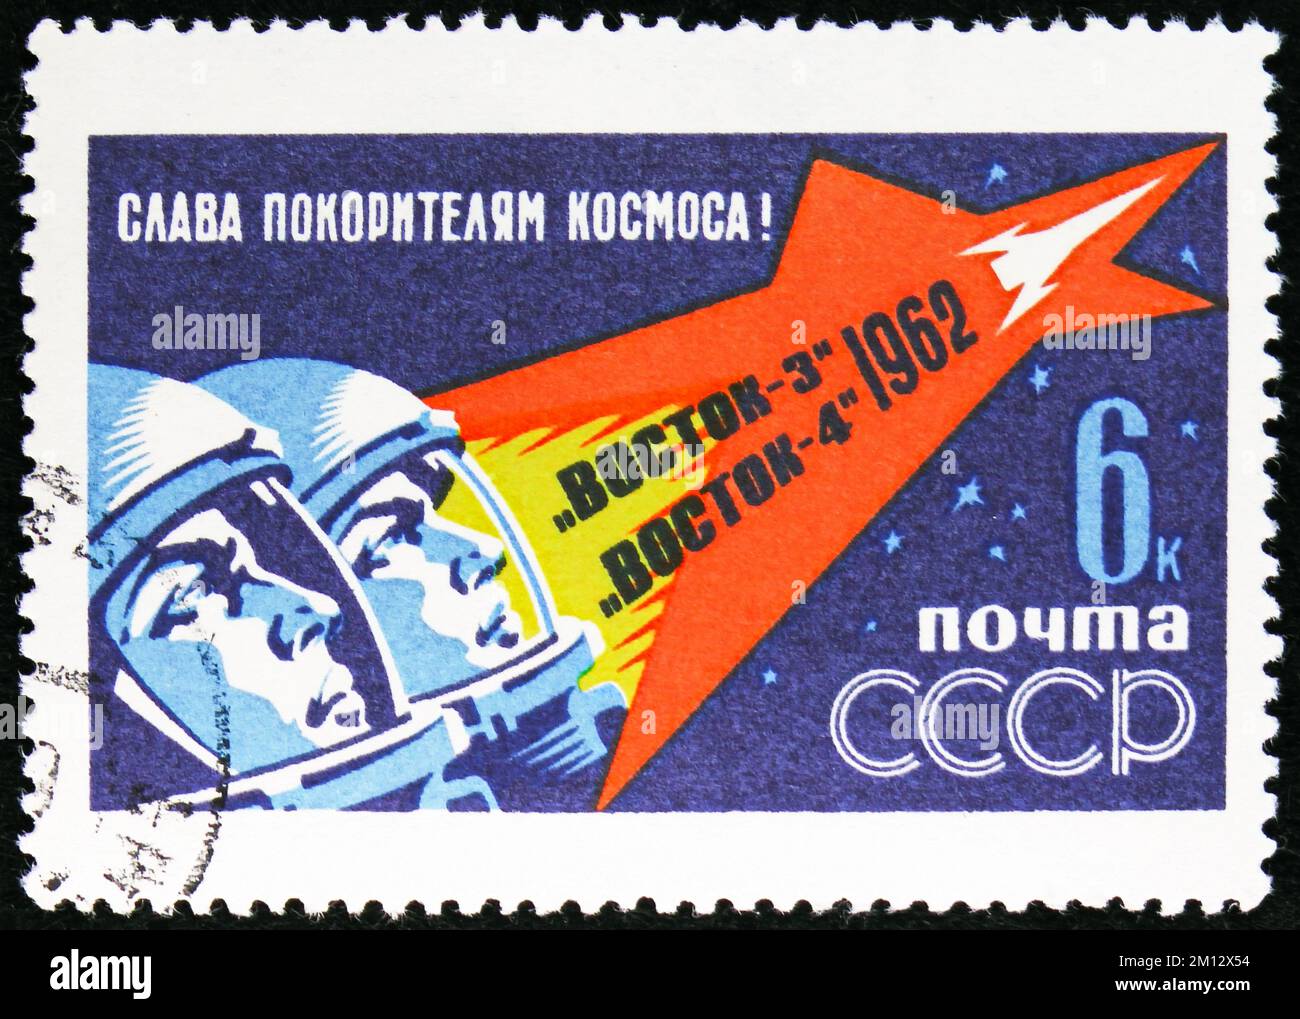 MOSCOW, RUSSIA - OCTOBER 29, 2022: Postage stamp printed in USSR shows Cosmonauts in Flight - 'Glory to the Conquerors of Space', First Paired Manned Stock Photo